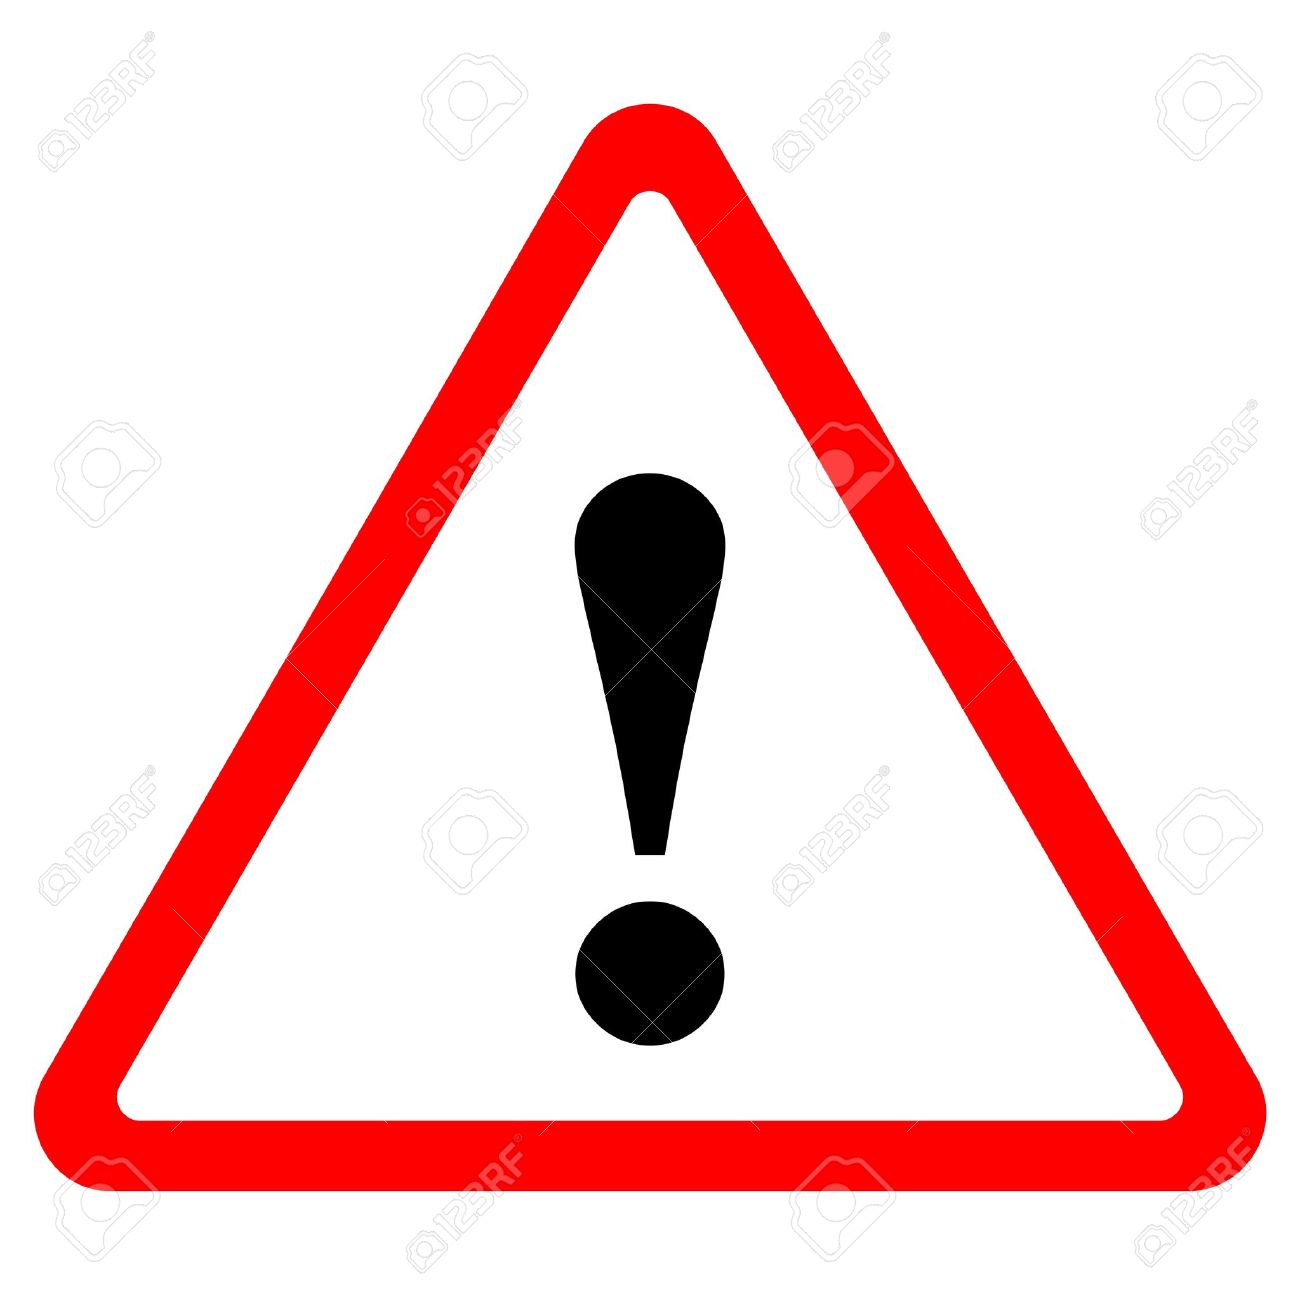 Warning Sign Clipart | Free download on ClipArtMag